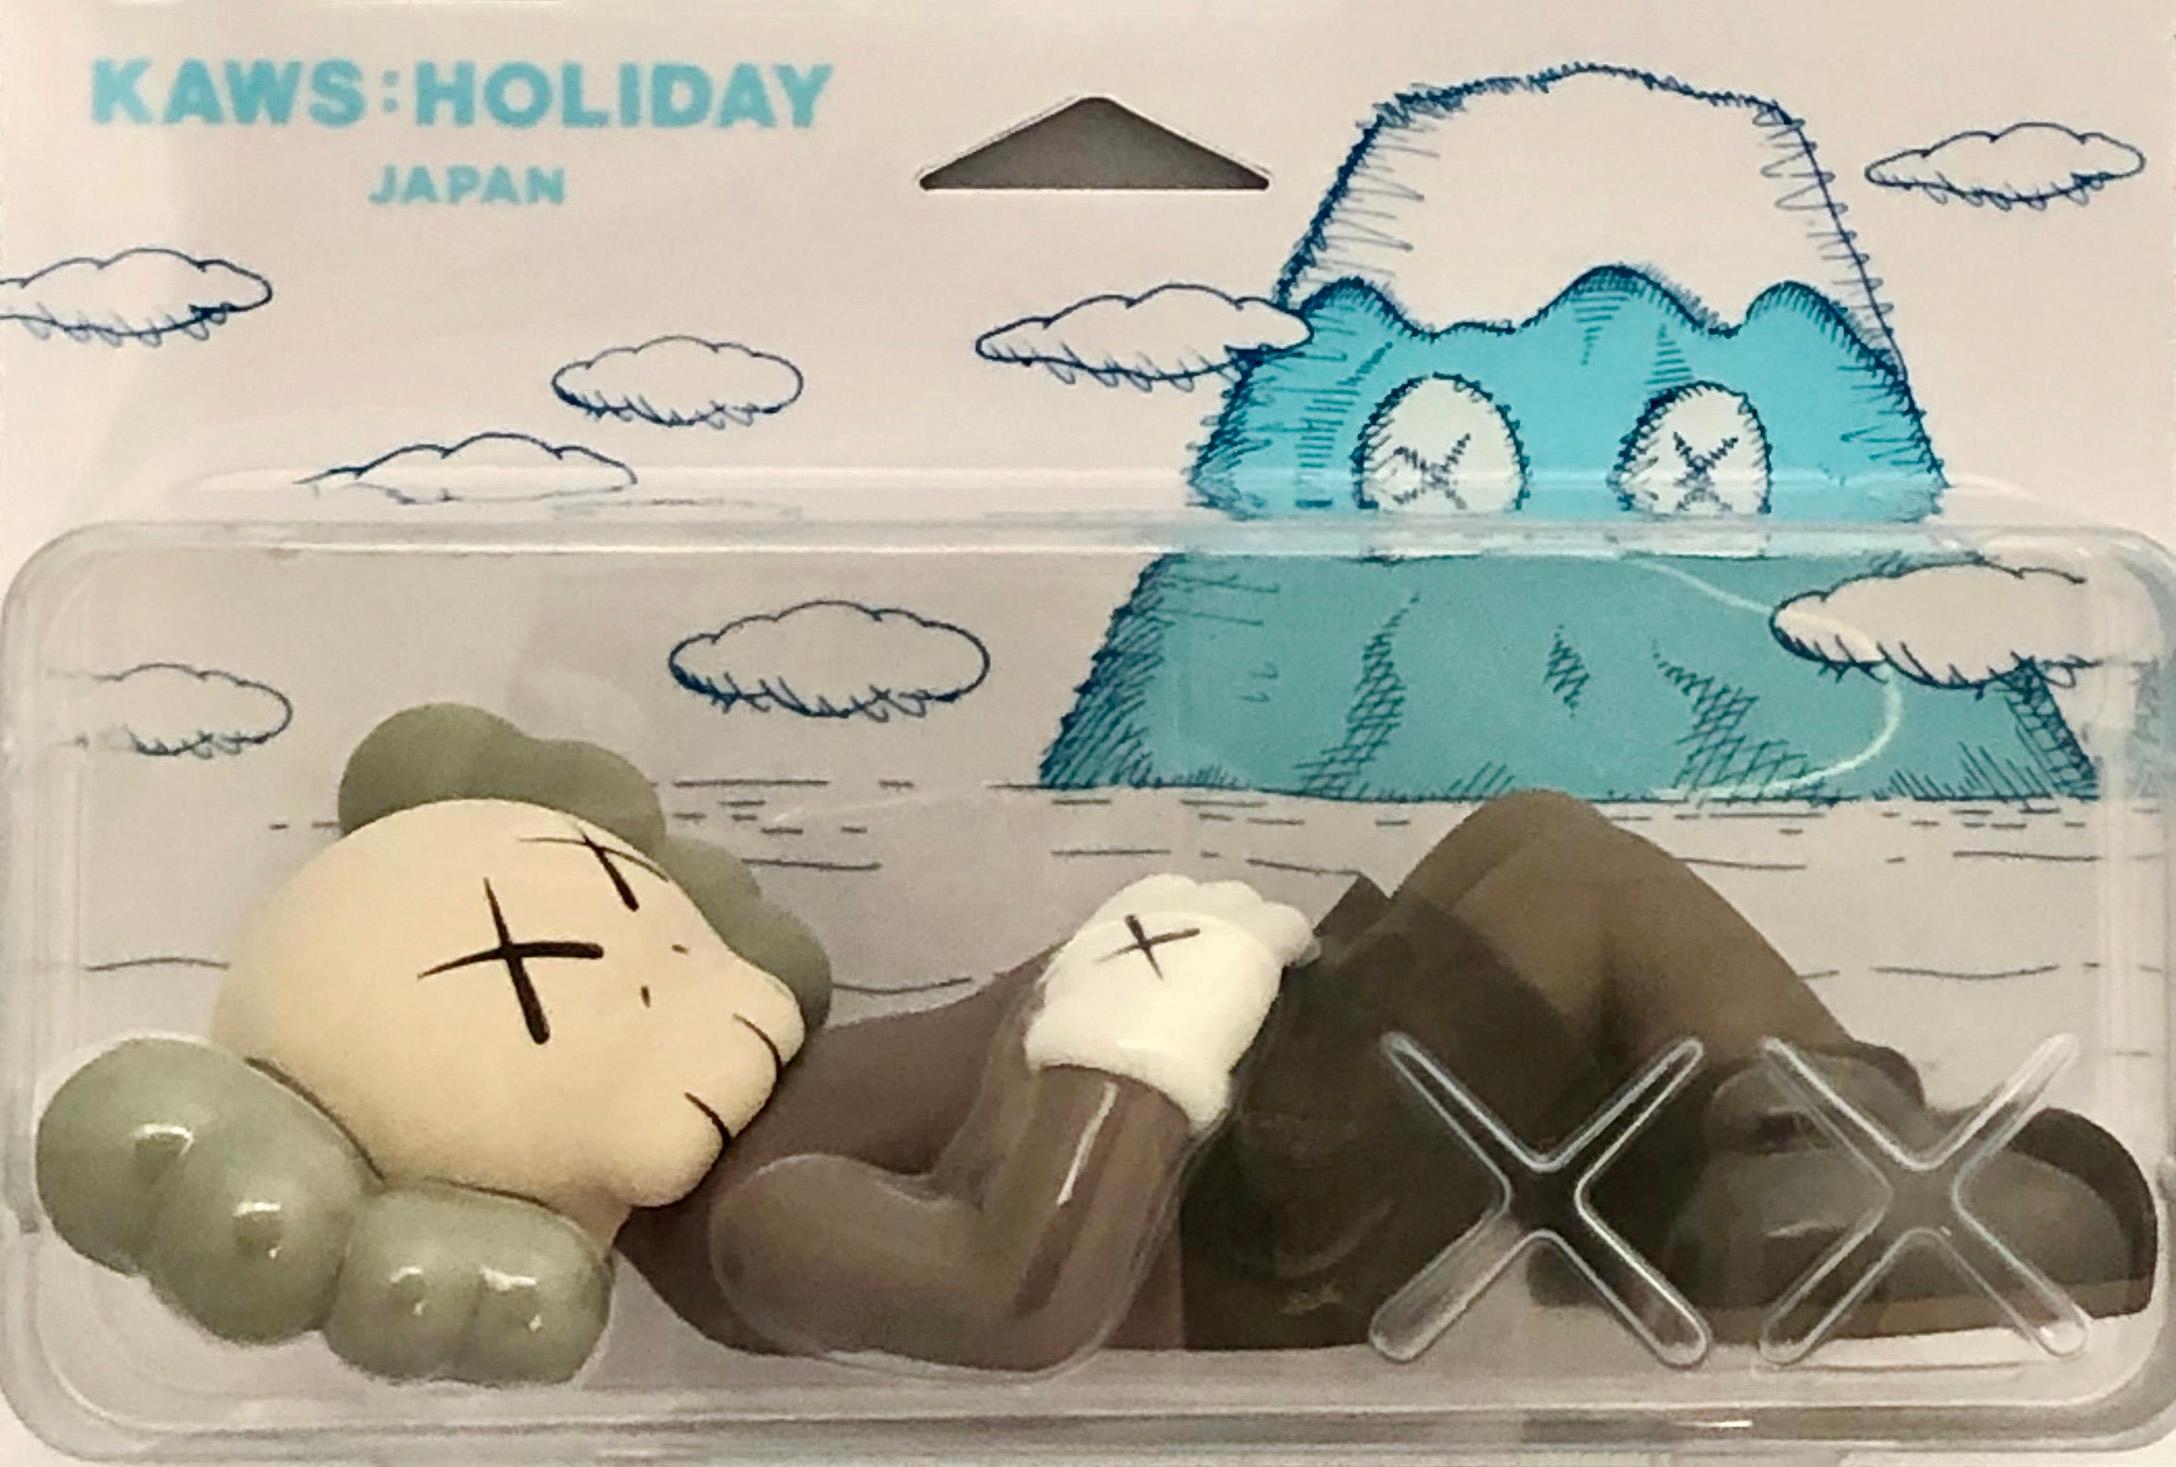 KAWS Brown Holiday Companion (KAWS Mount Fuji Japan): 
This sold out figurine features KAWS' signature character COMPANION in a resting position. This figurine was published by All Rights Reserved to commemorate the debut of KAWS’ 40-meters-long